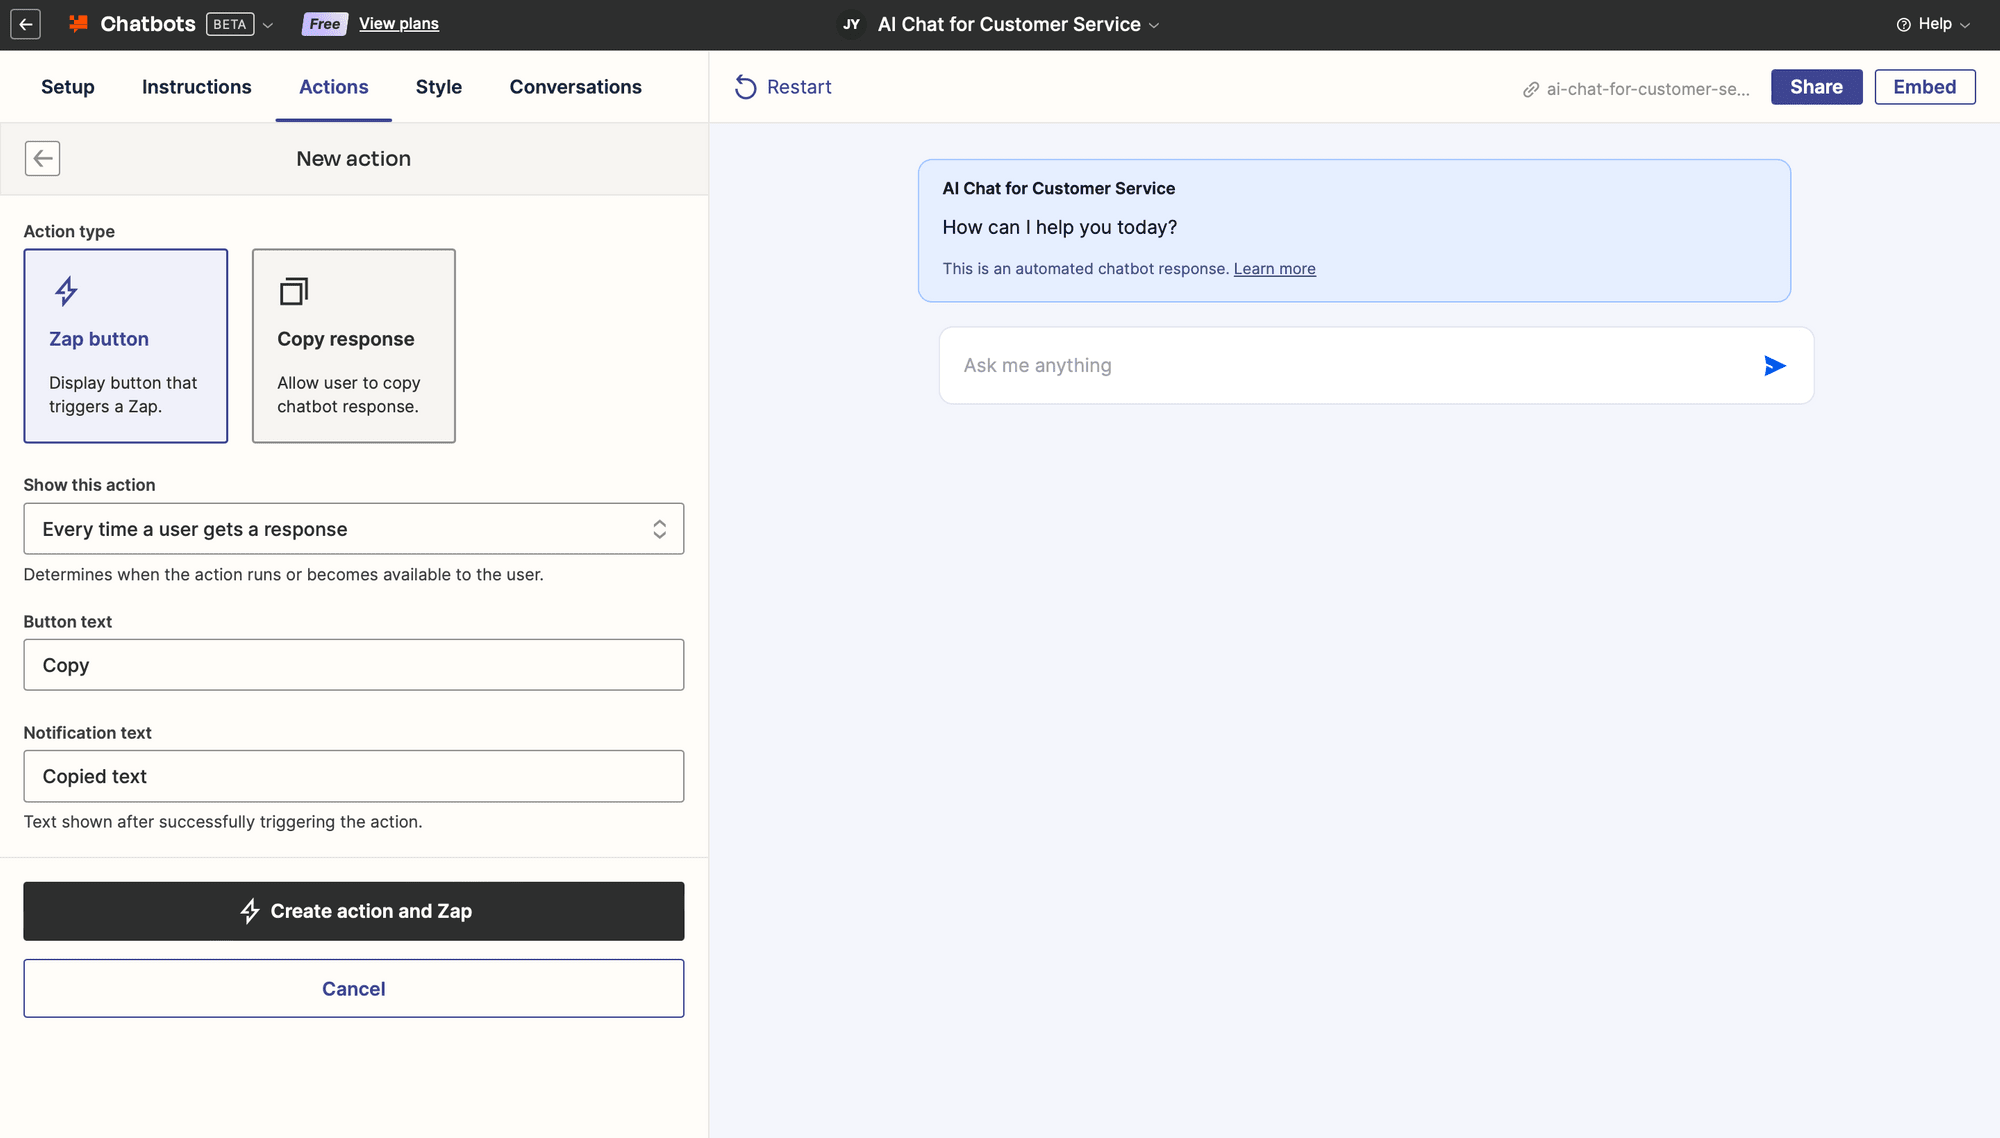 Screenshot of Zapier Chatbots actions tab zap button type